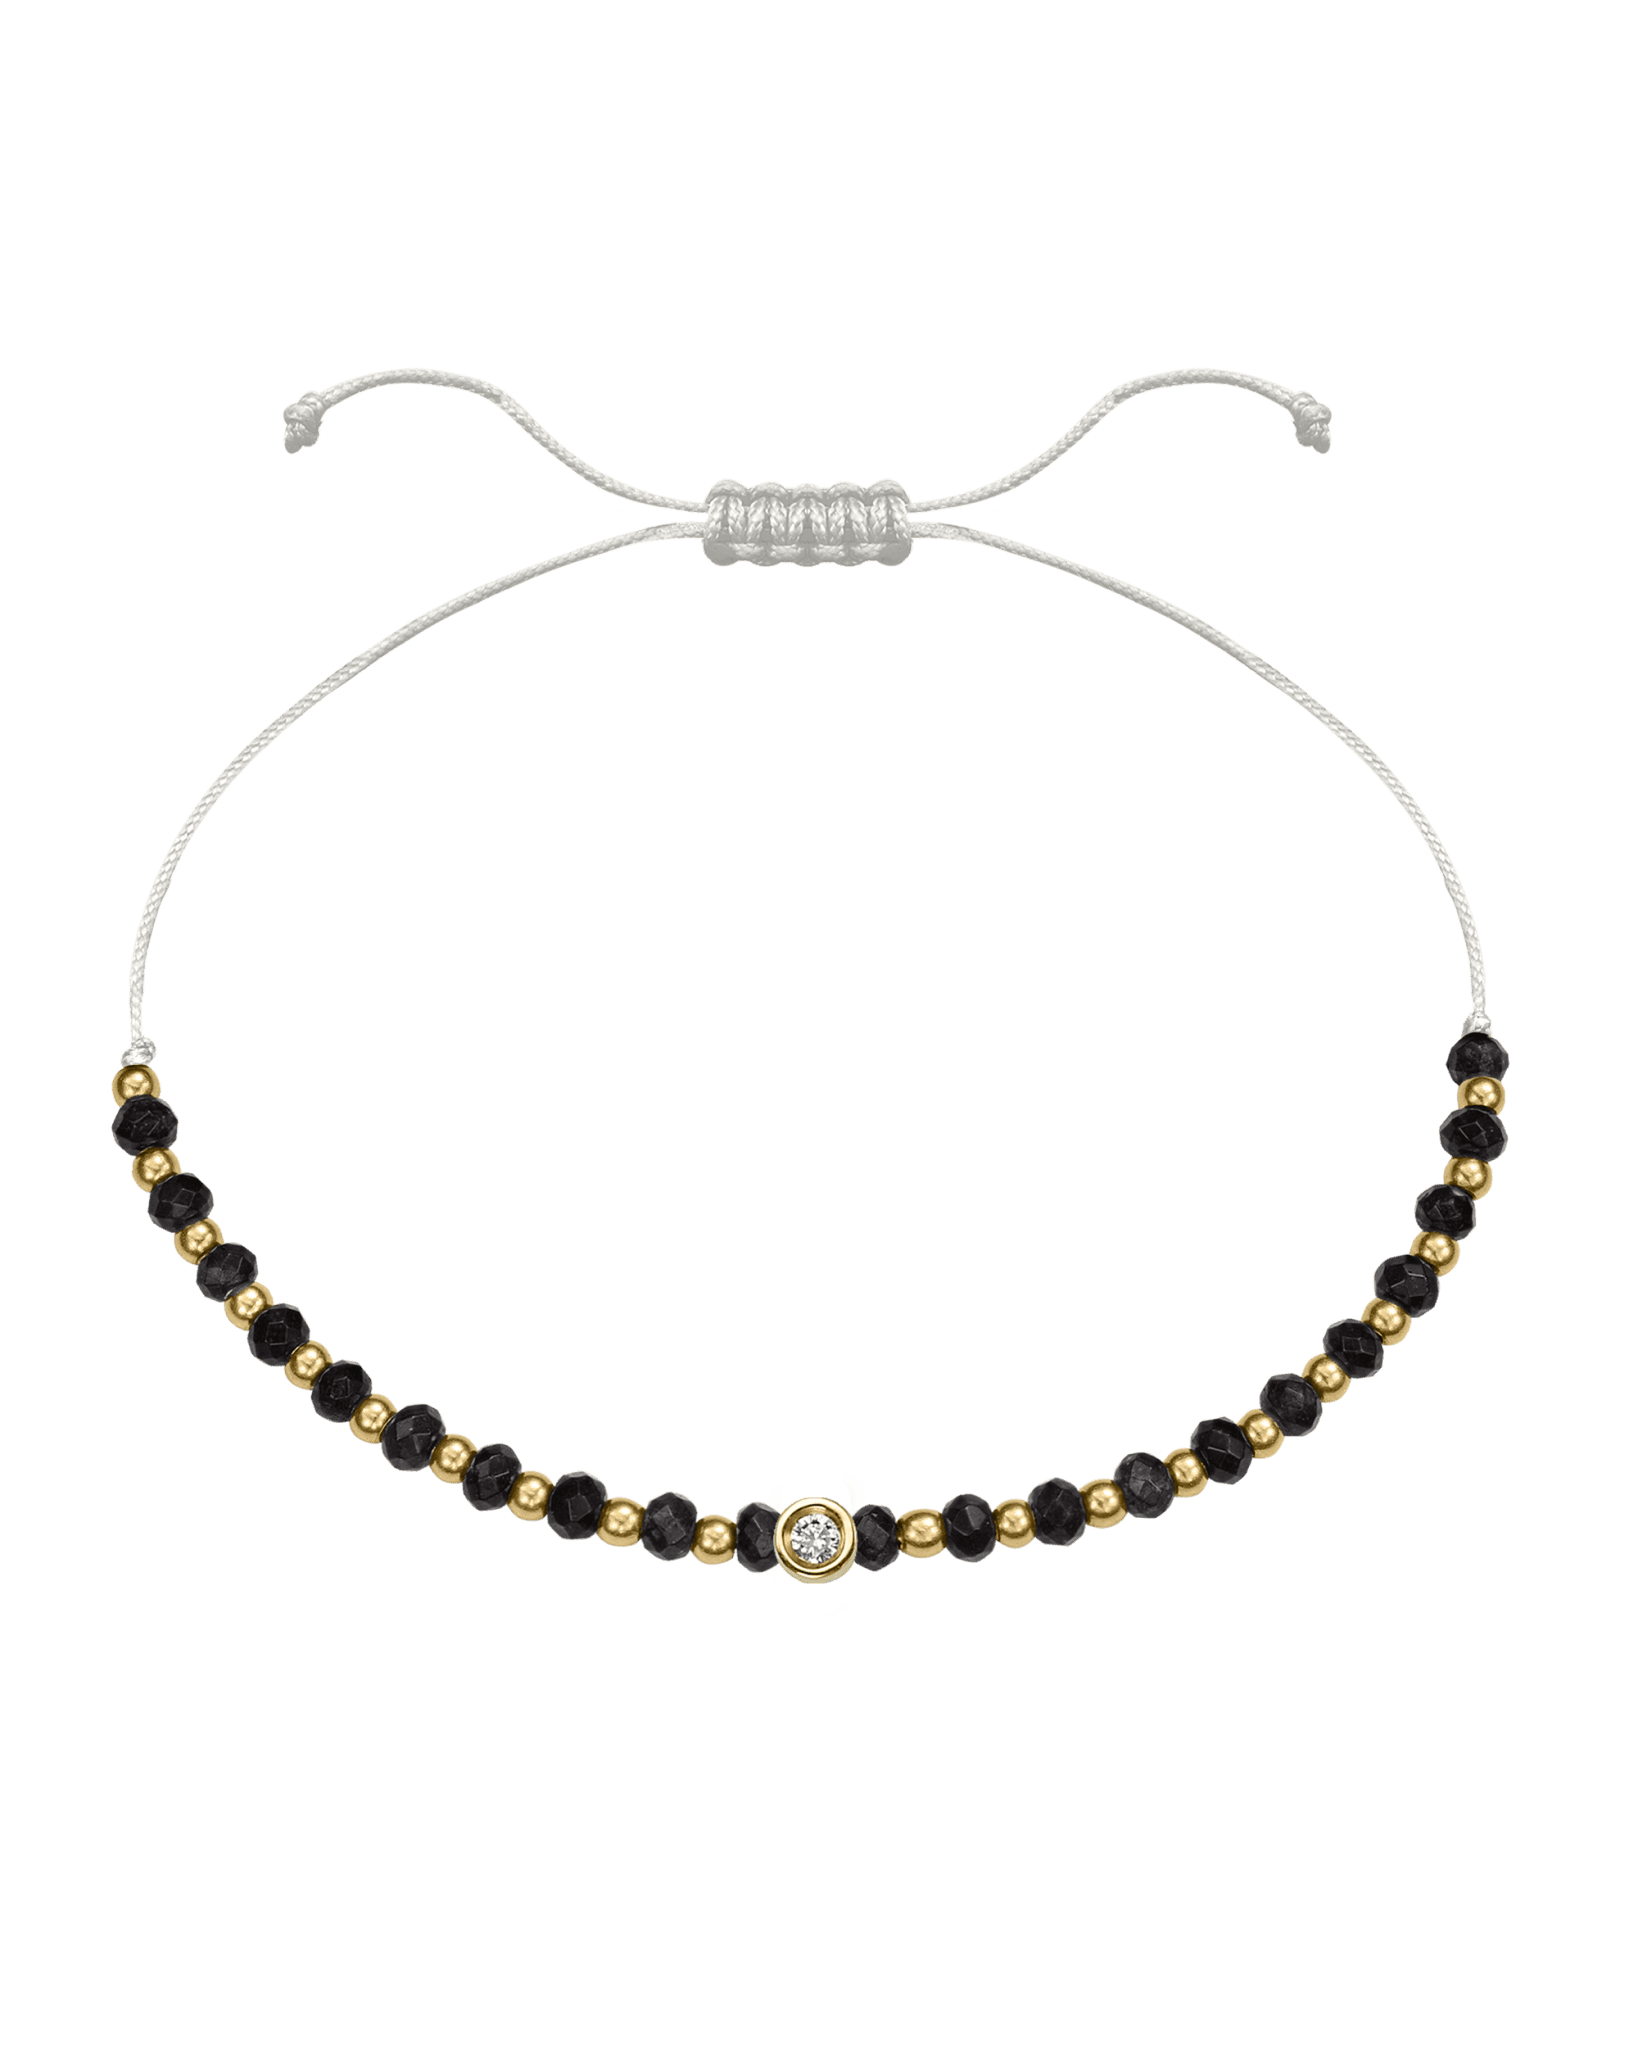 Black Onyx Gemstone String of Love Bracelet for Protection - 14K Yellow Gold Bracelets 14K Solid Gold Pearl Small: 0.03ct 